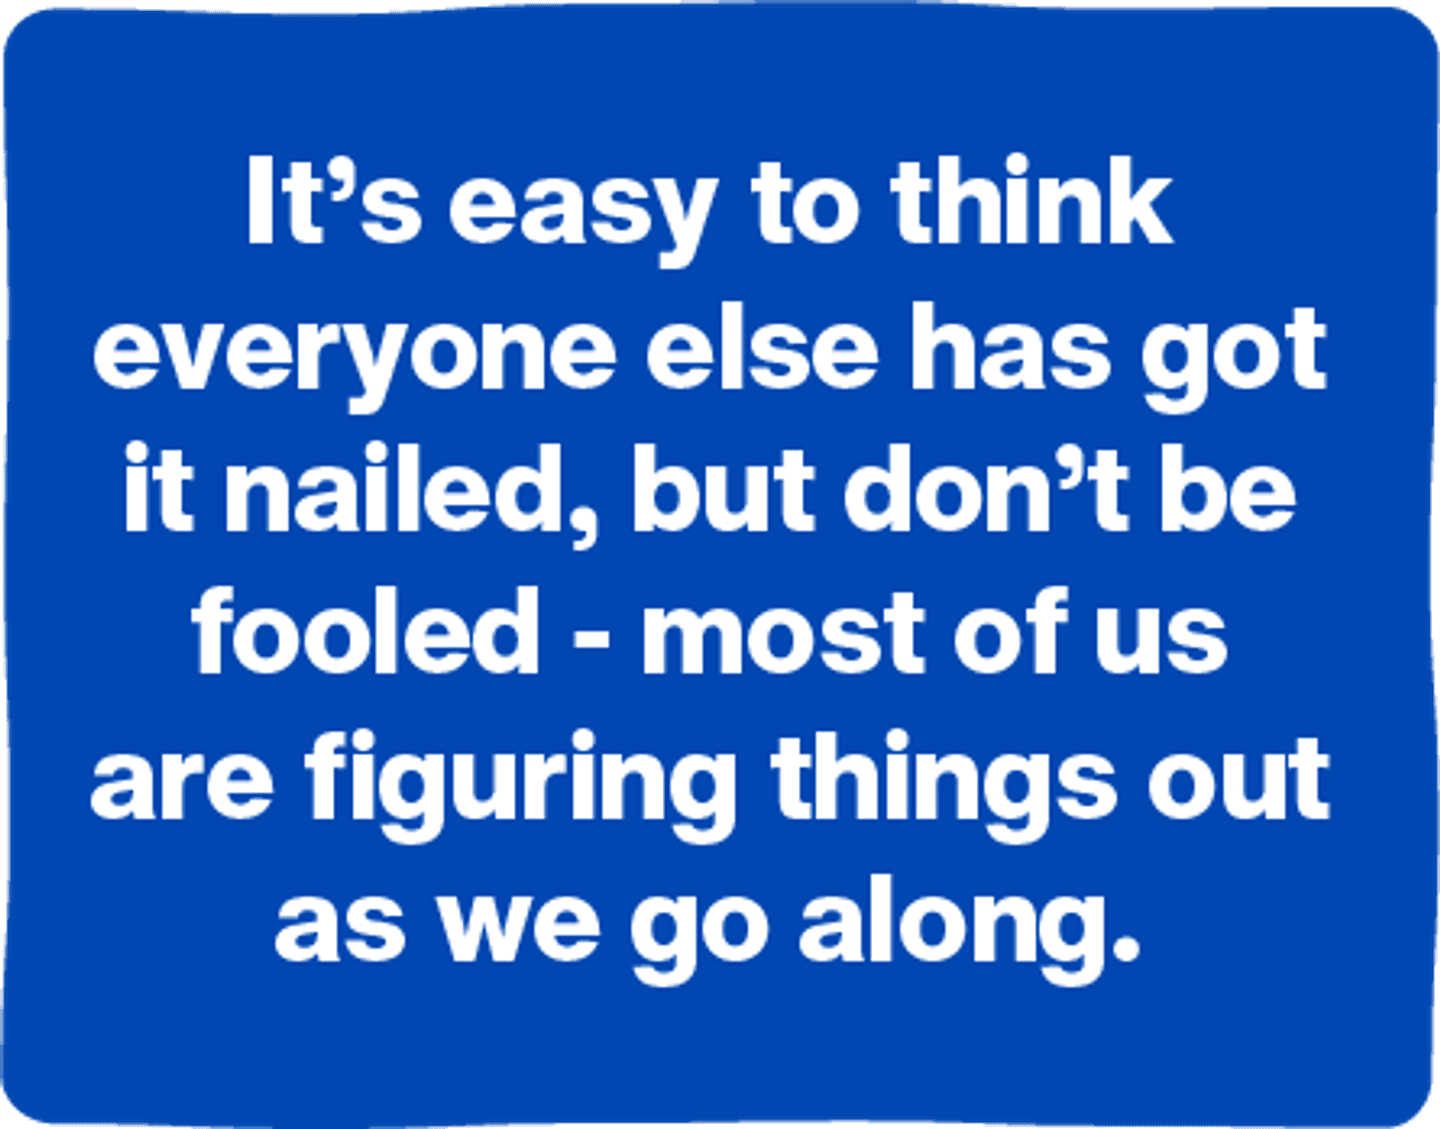 It's easy to think everyone else has got it nailed, but don't be fooled - most of us are figuring things out as we go along.